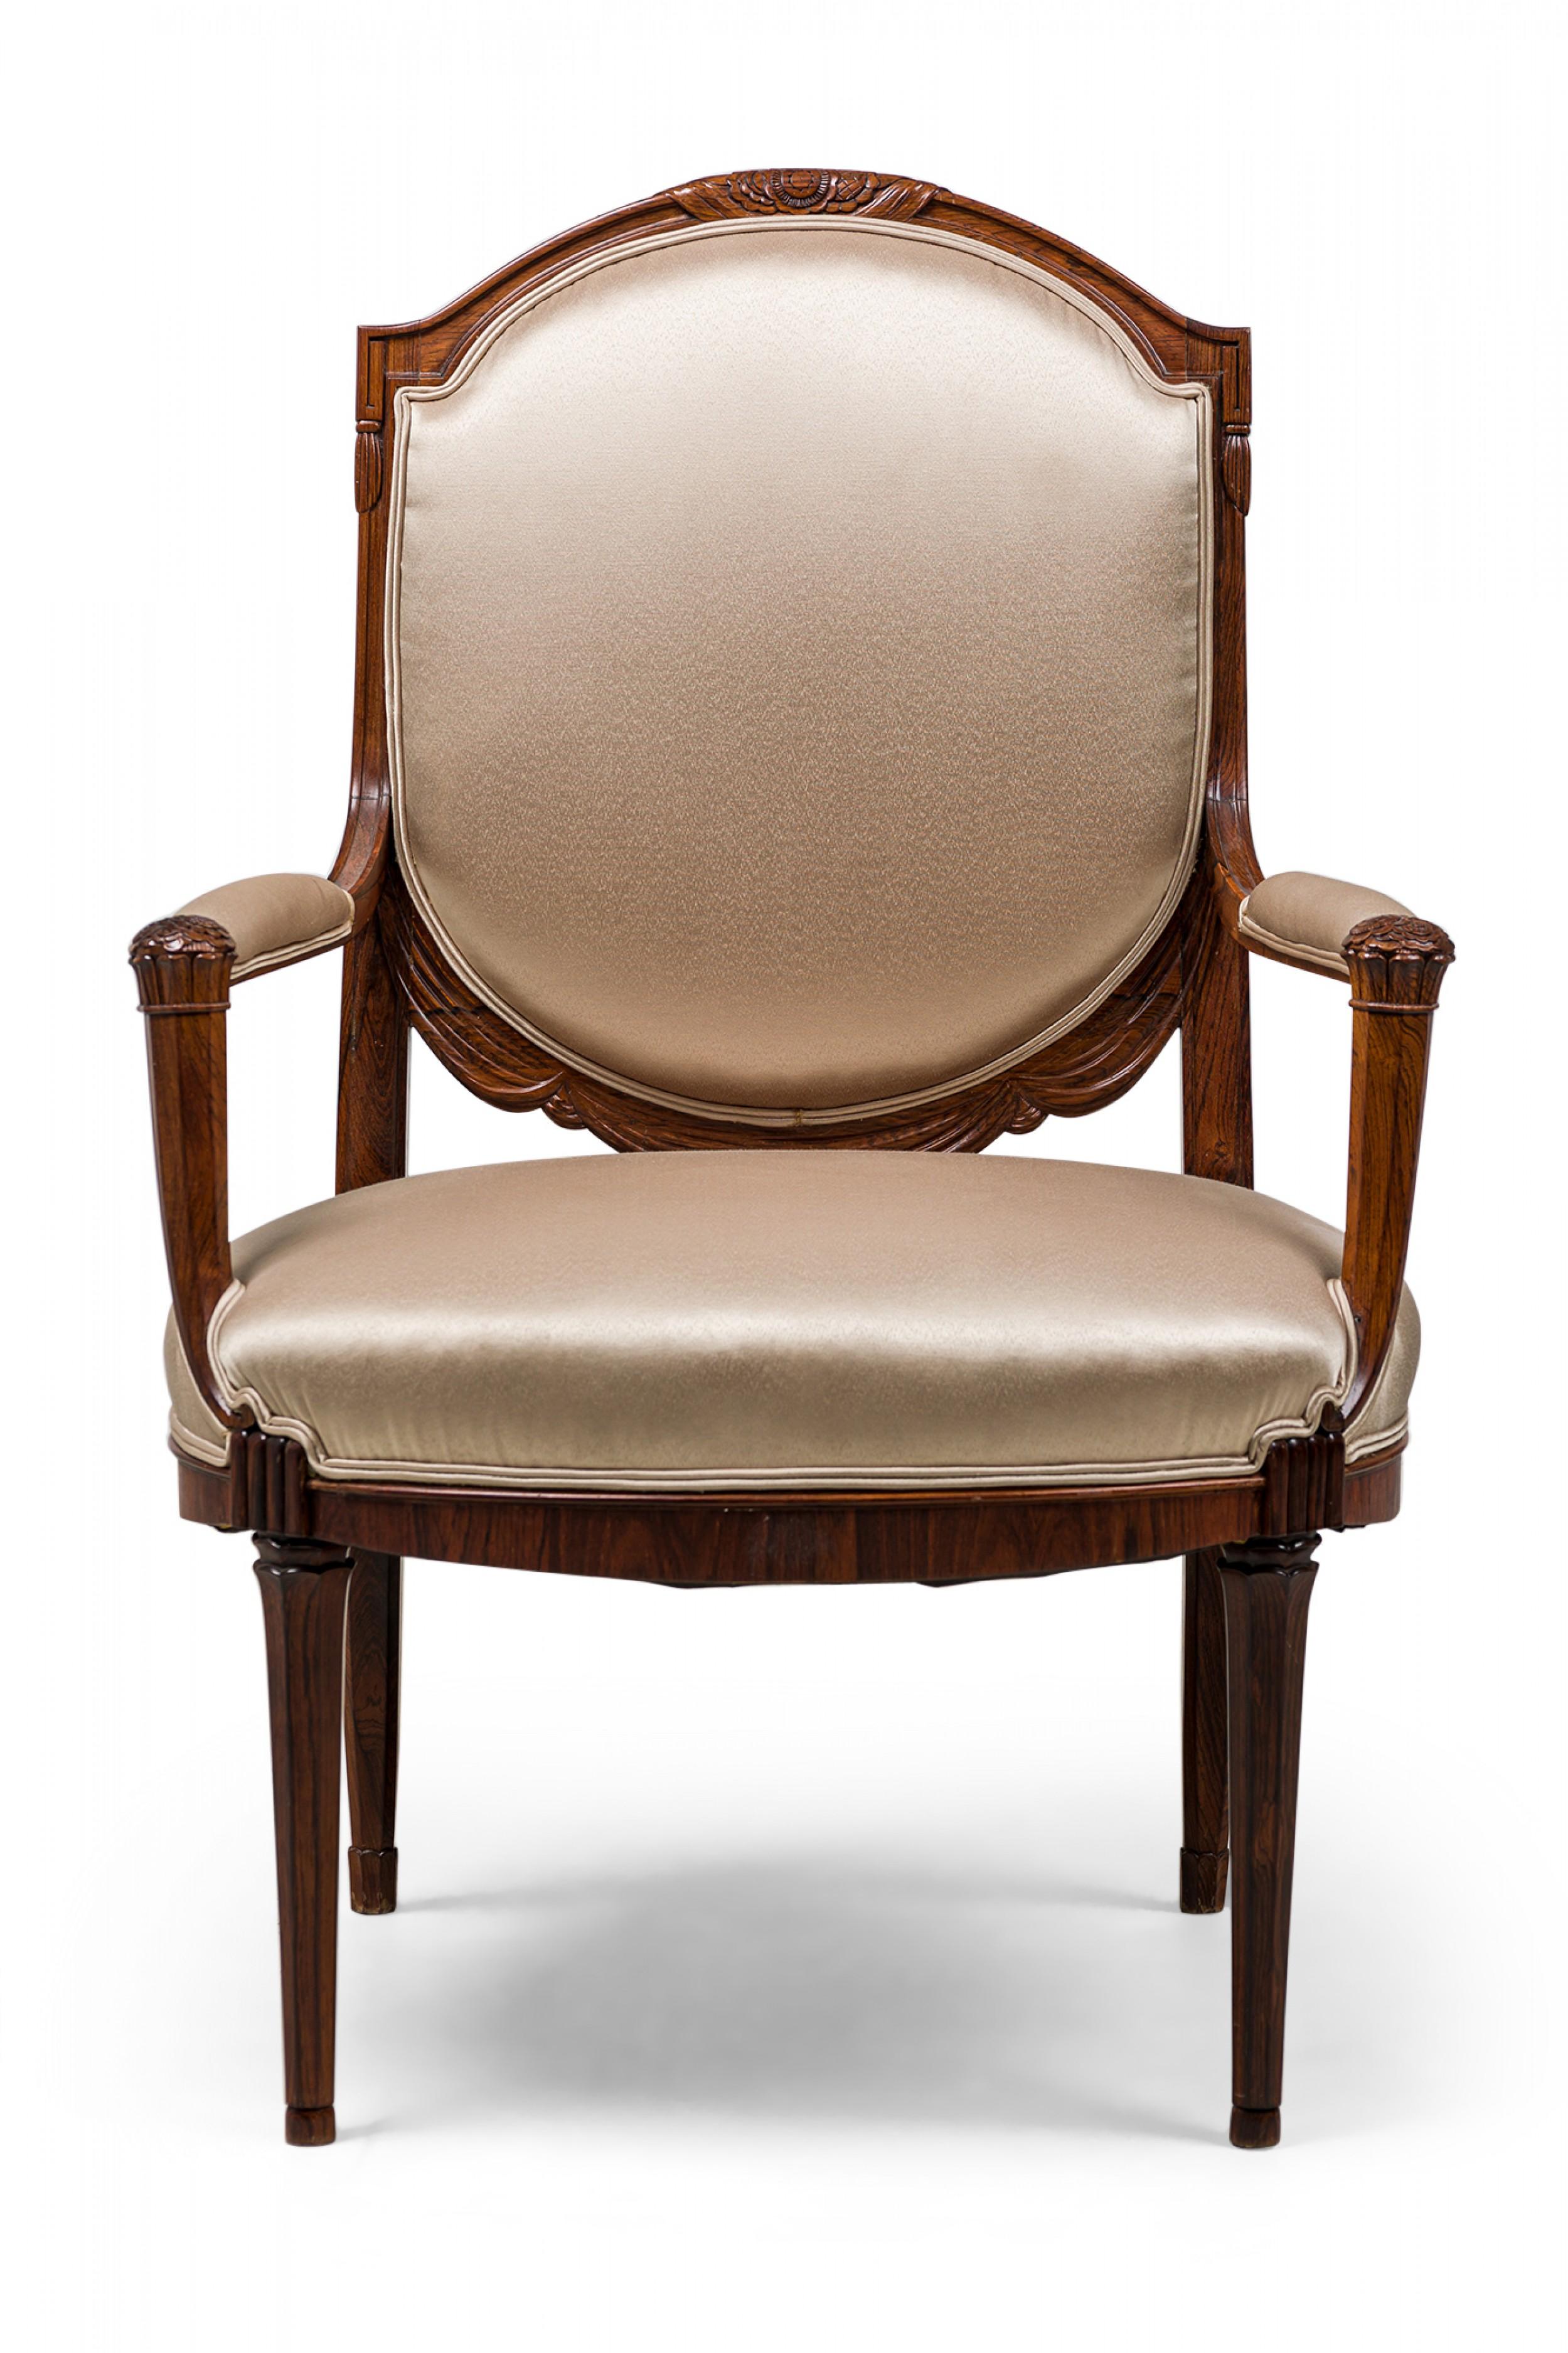 Pair of Late Art Deco French Mahogany Beige Sateen Upholstered Armchairs In Good Condition For Sale In New York, NY